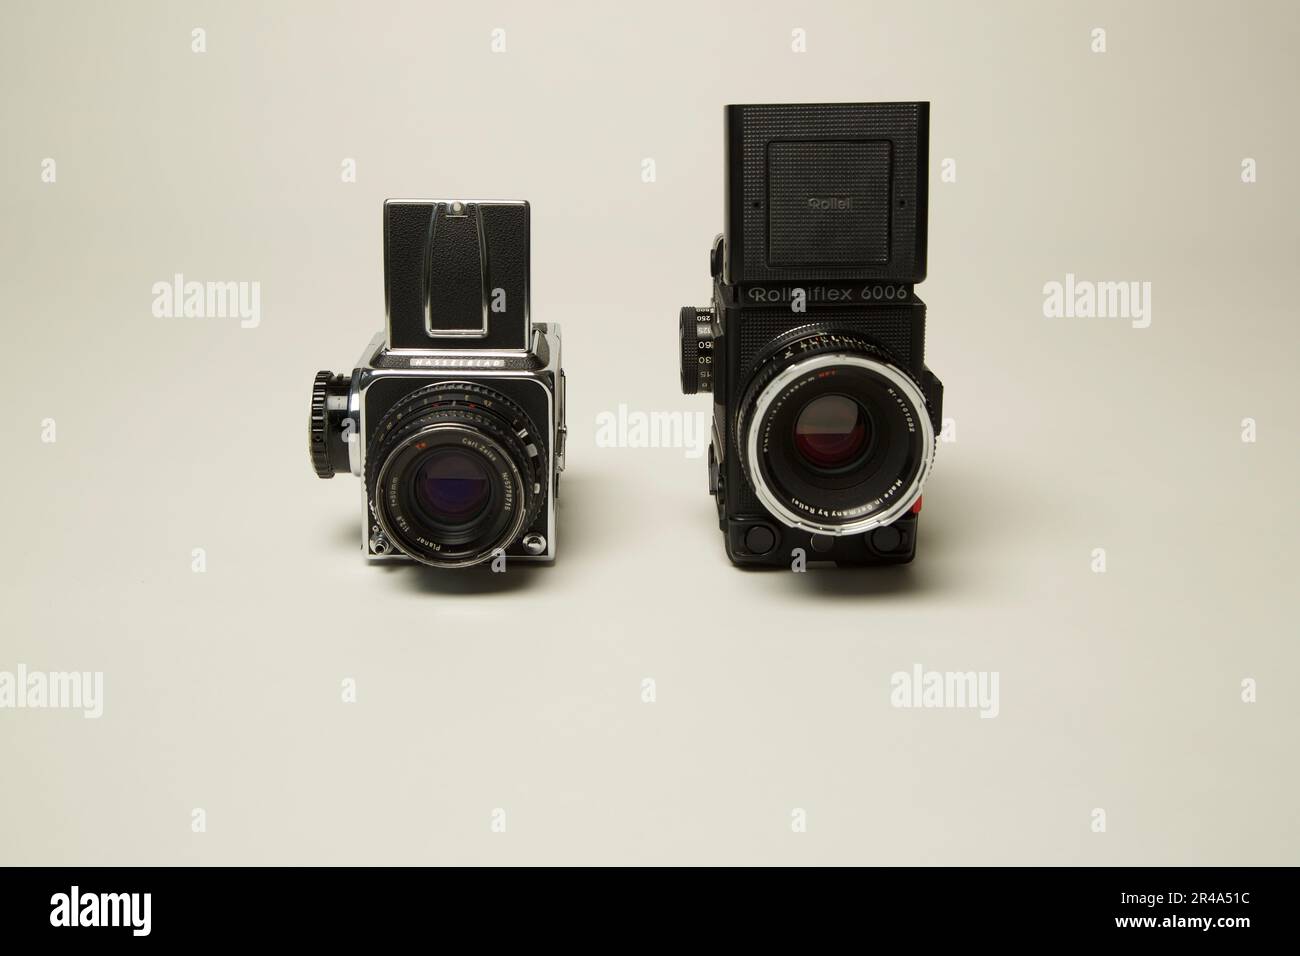 Hasselblad and Rolleiflex vintage analog Camera Stock Photo